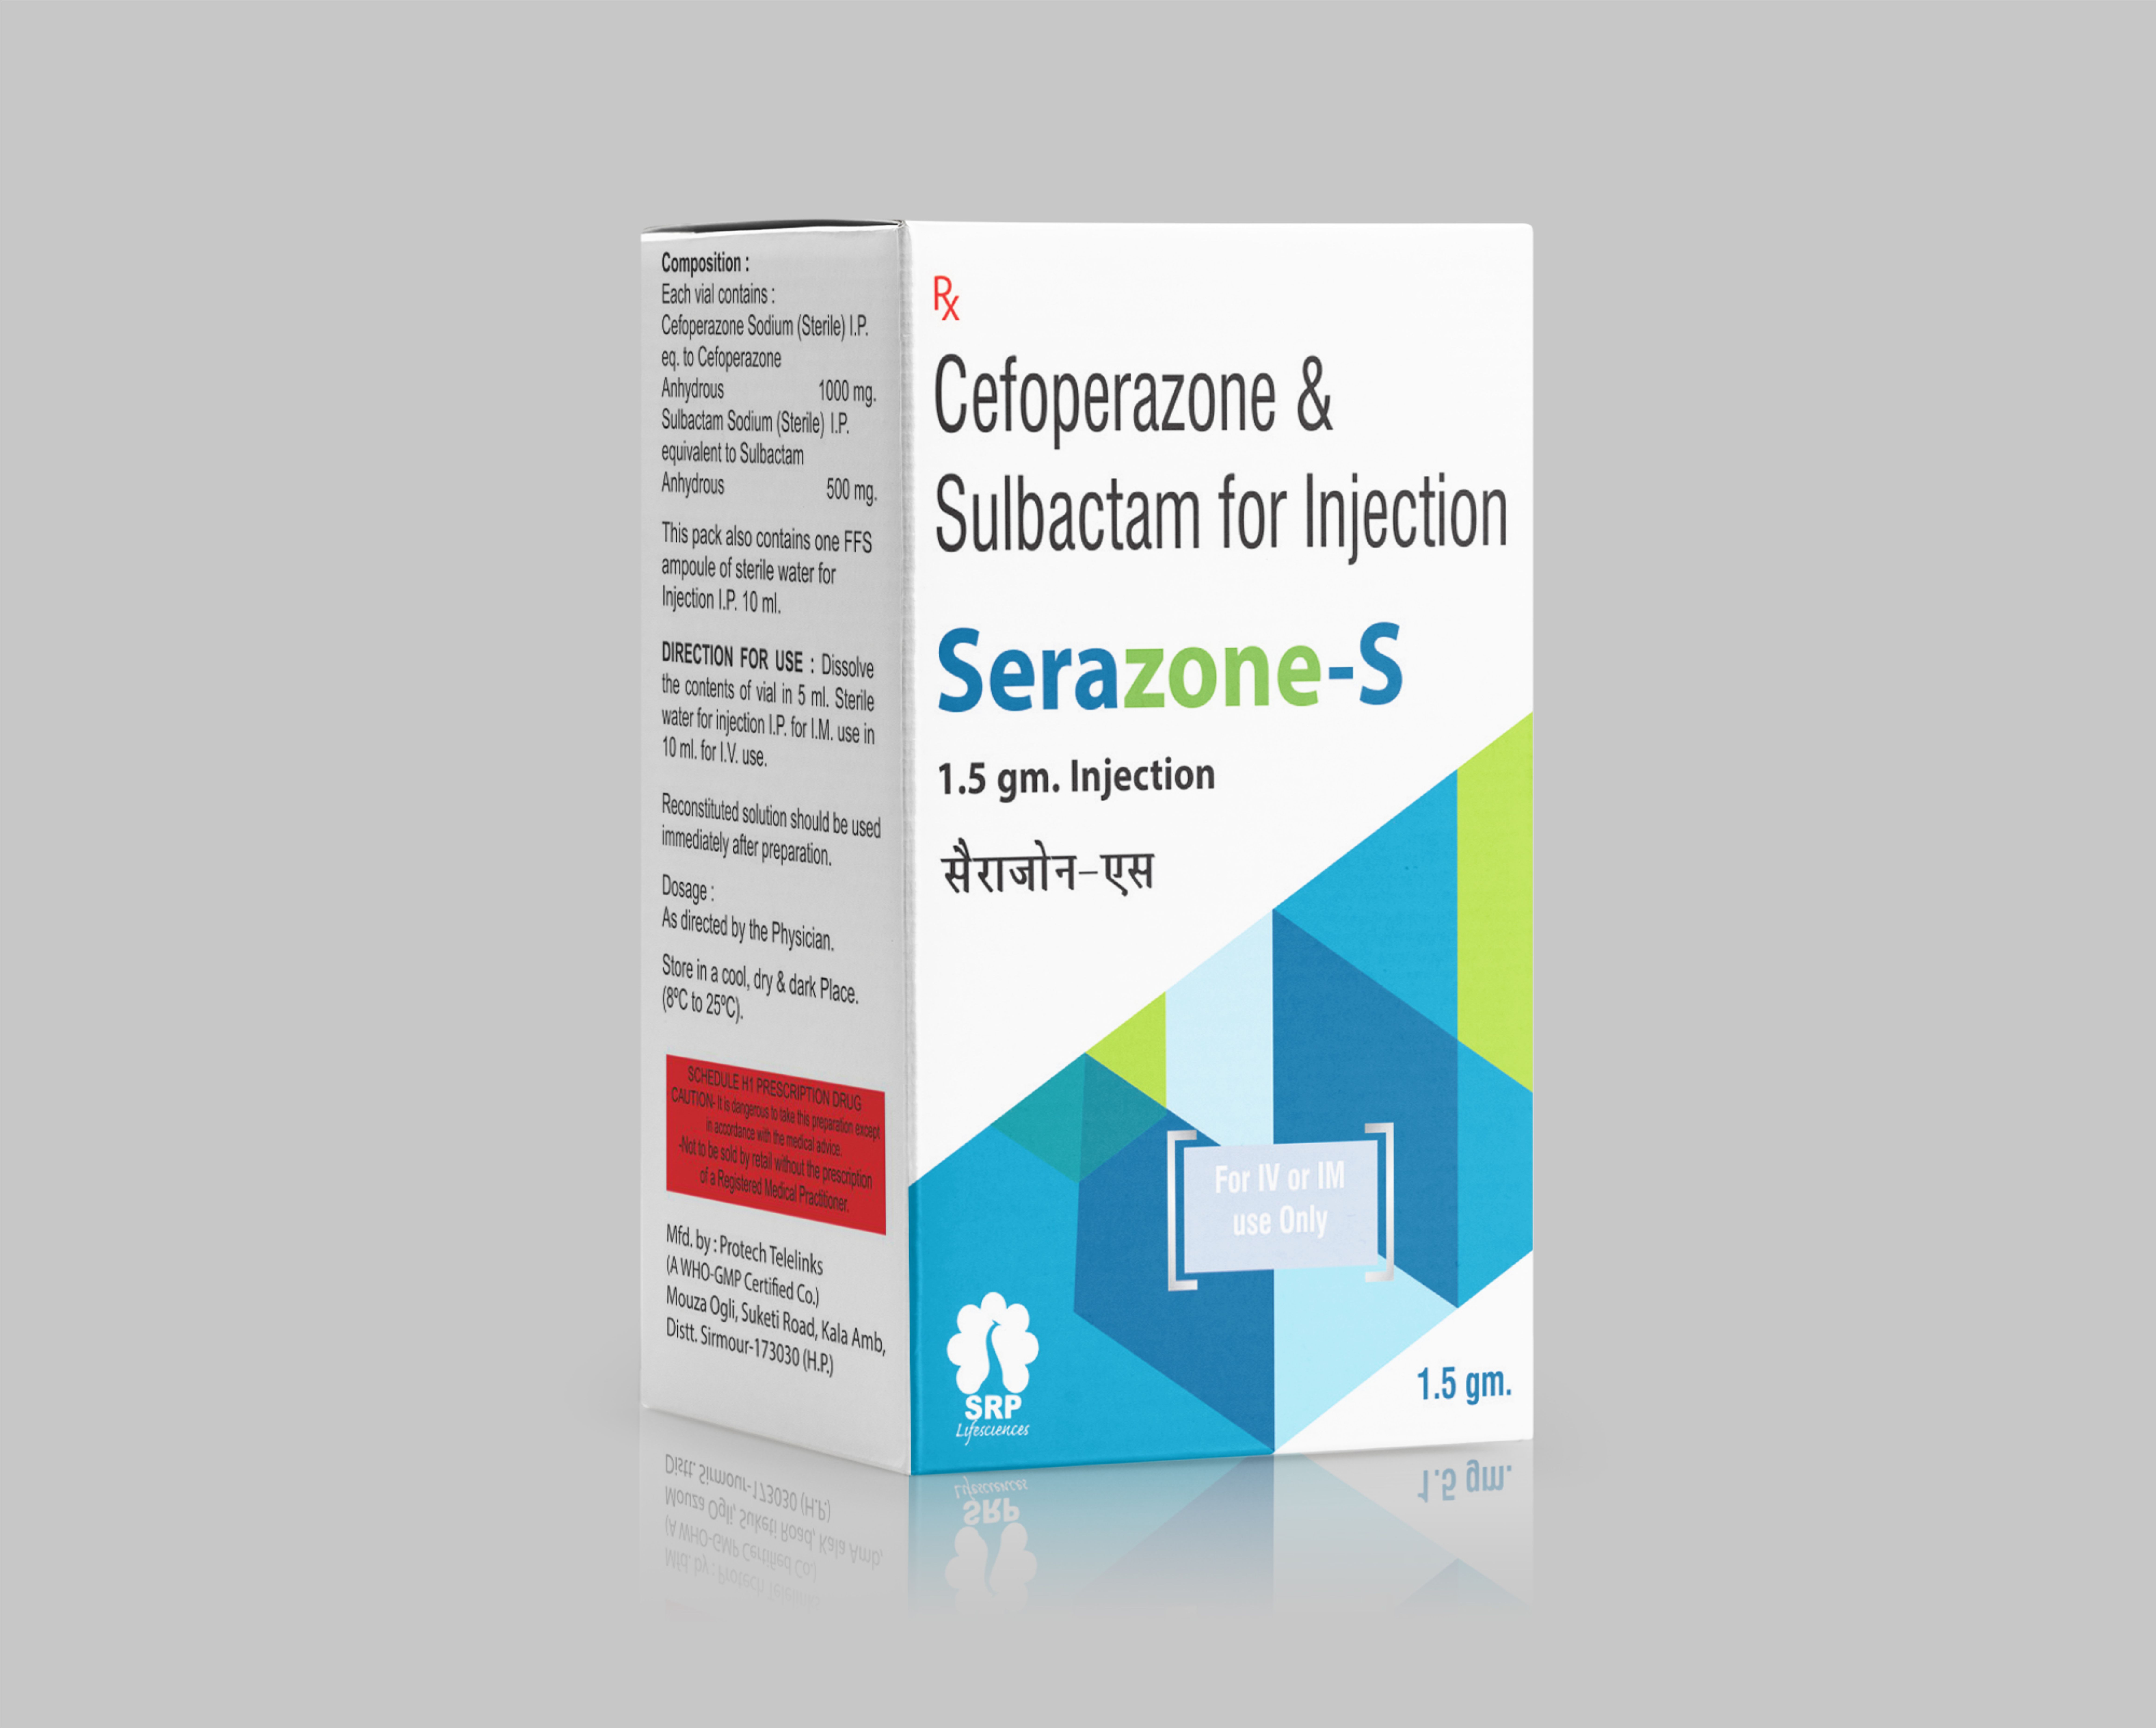 CERAZONE S 1.5  injection are Cefoperazone & Sulbactam for injection - Cynak Healthcare